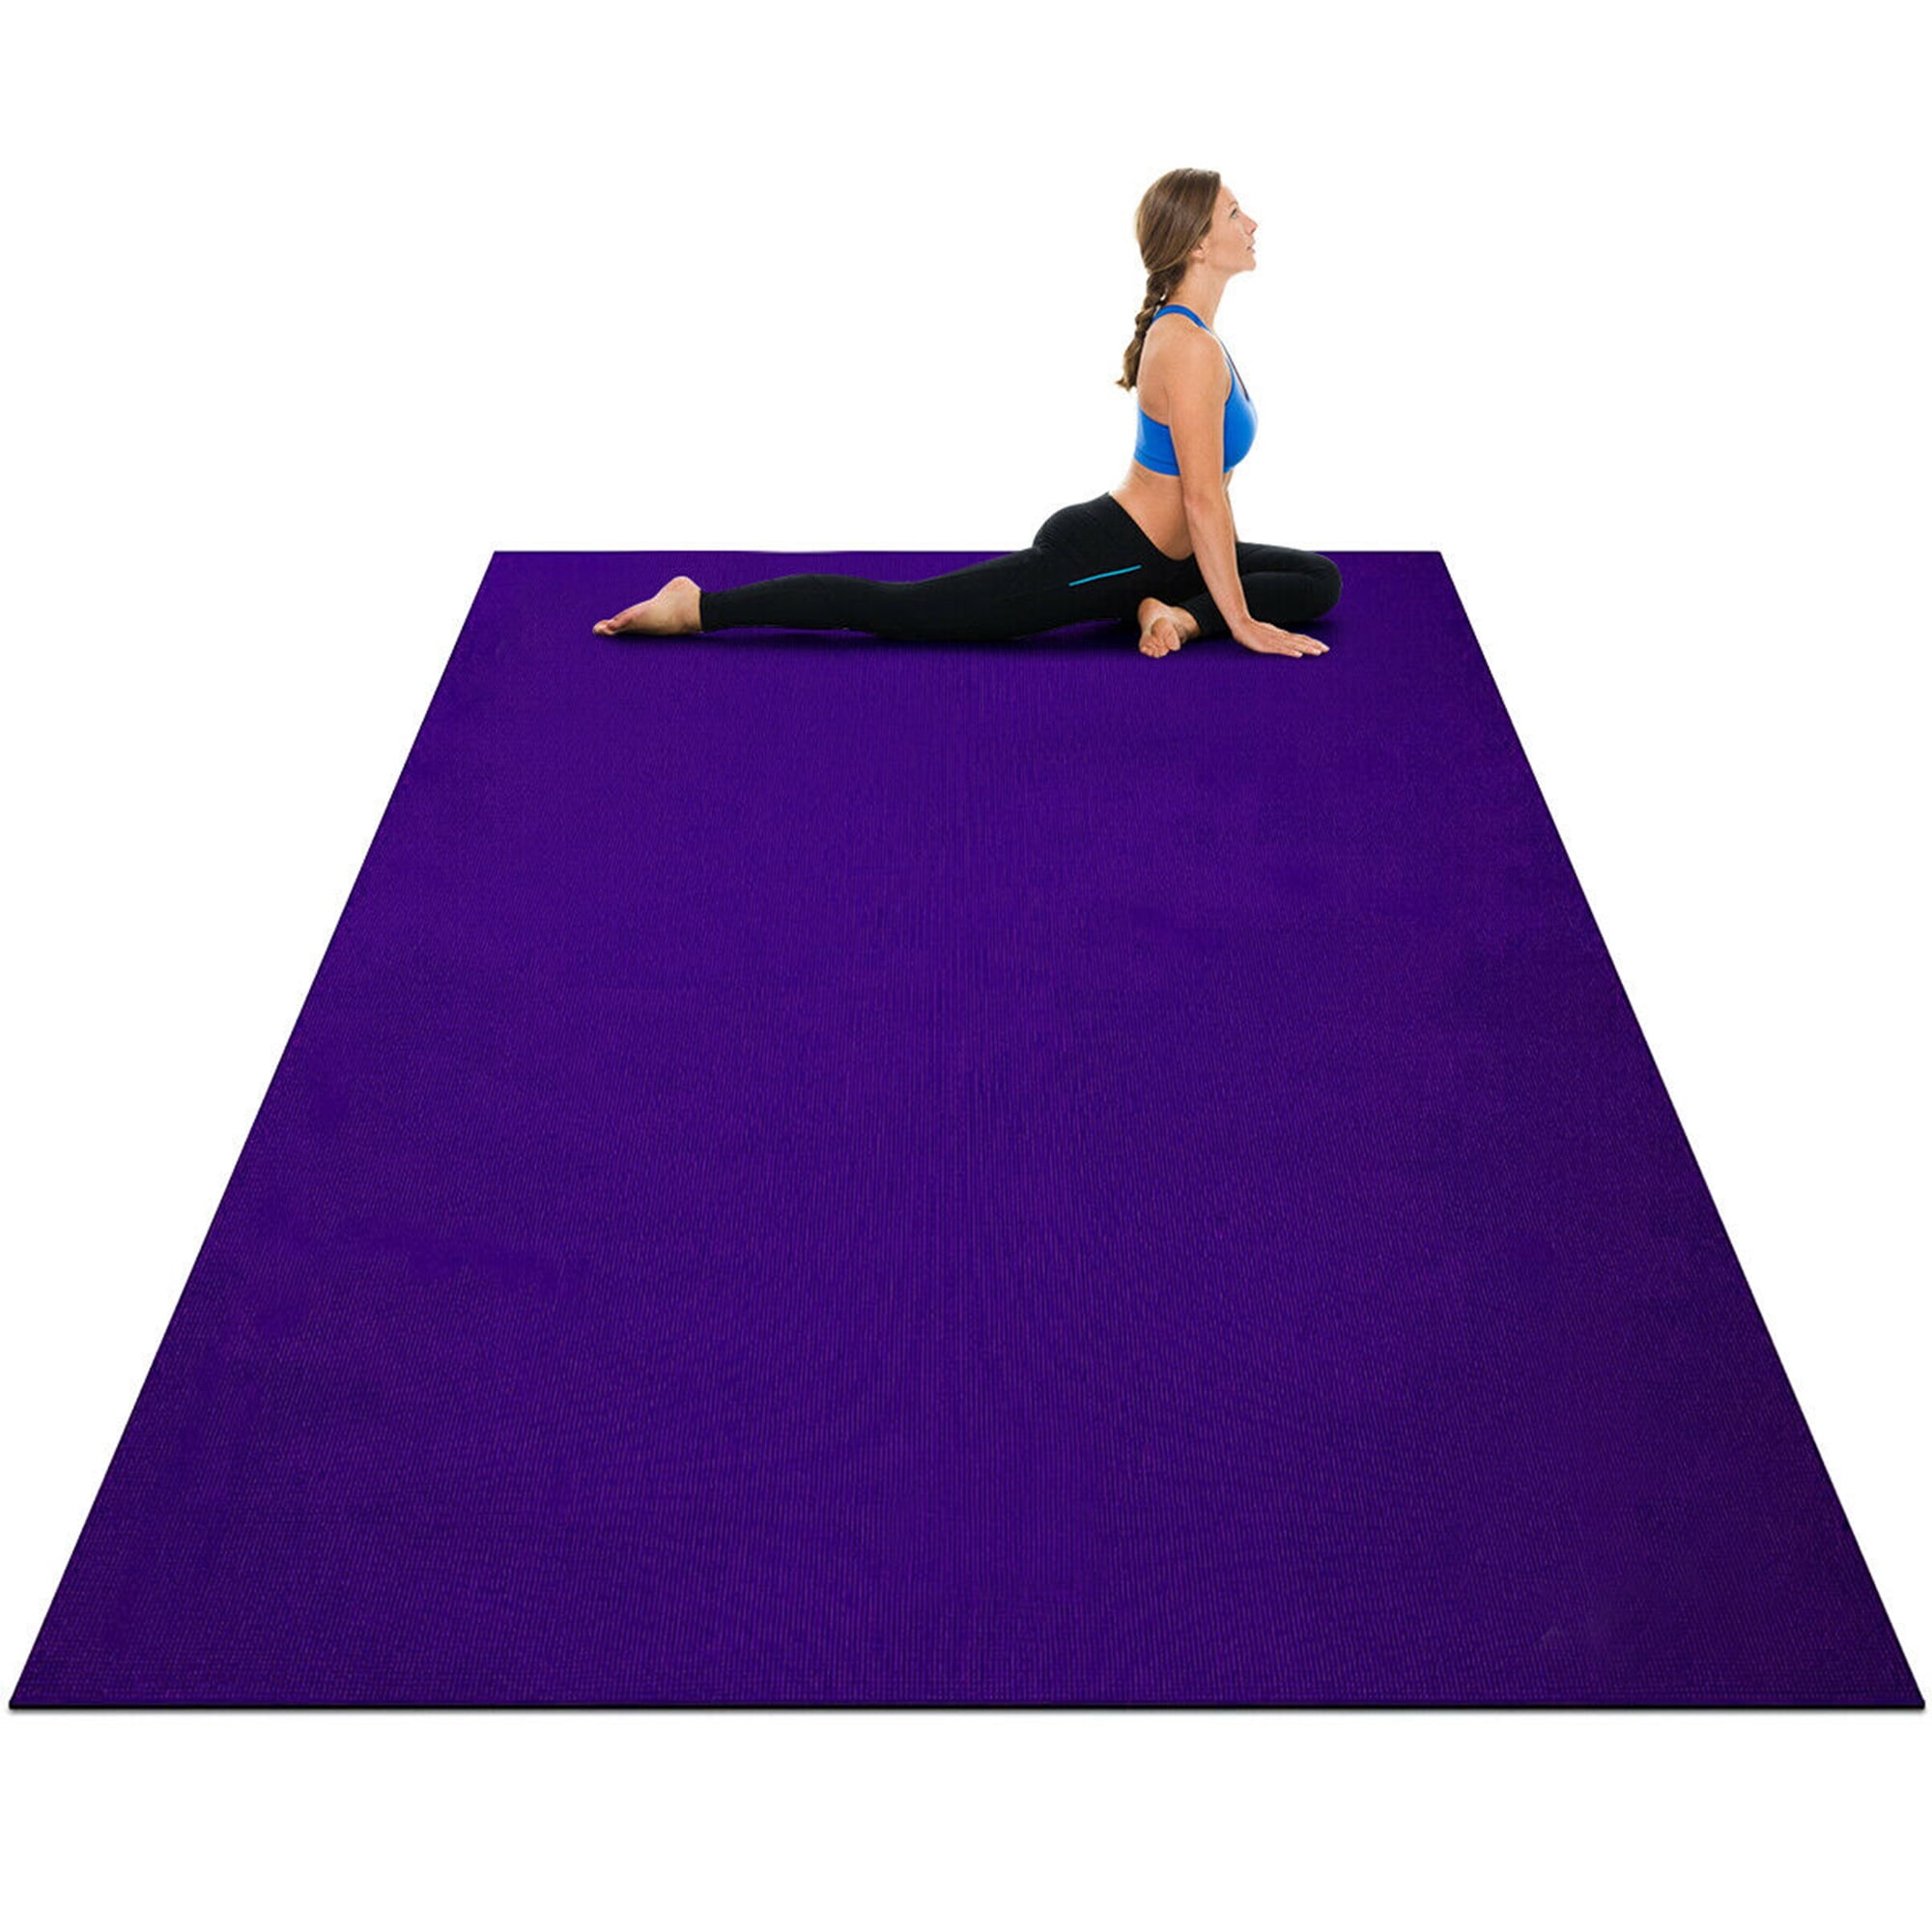 8ft Folding Gym Exercise 2" Foam Floor Mat Workout Yoga Pad Carrying Handle Pink 